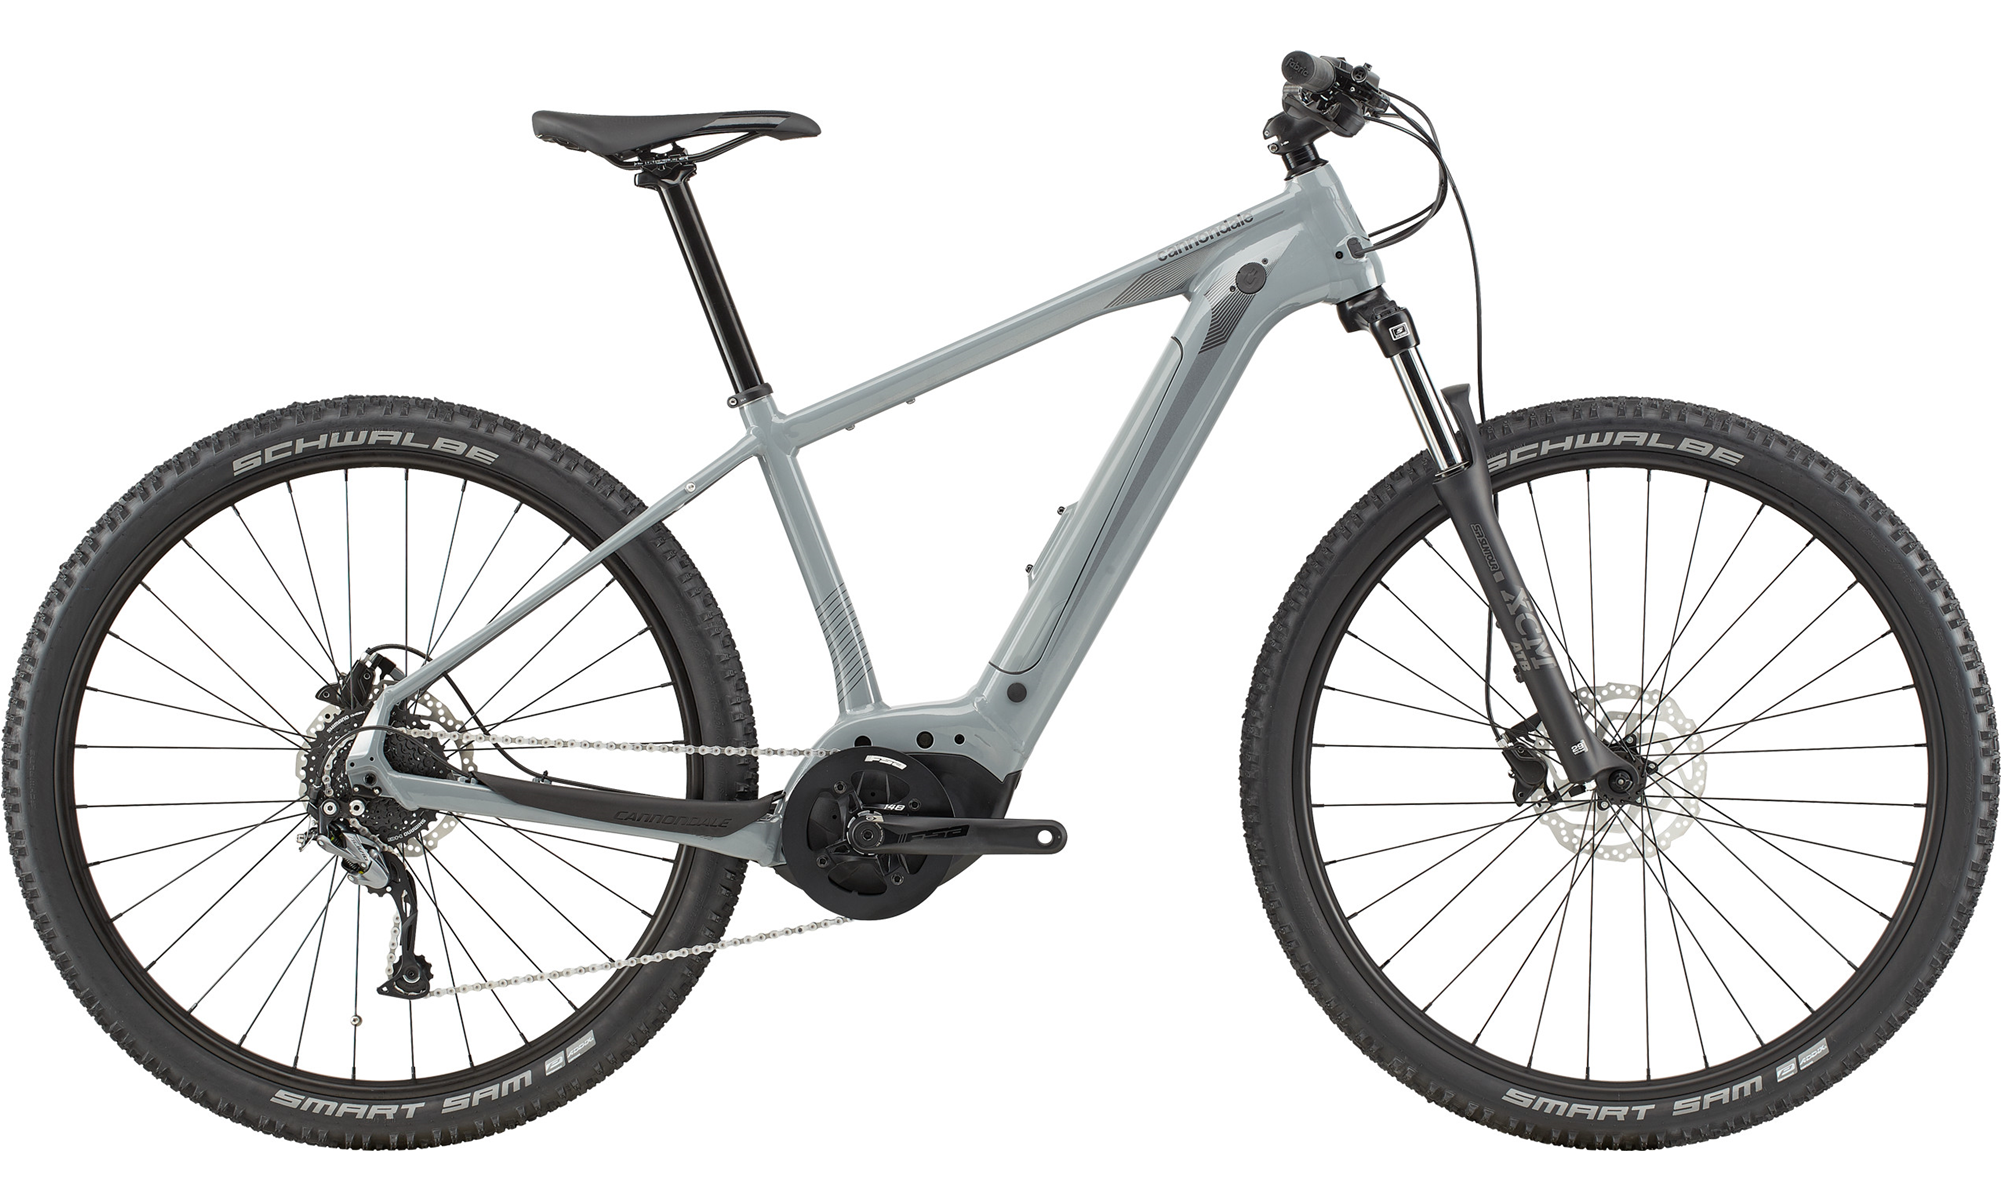 Paint for 2020 Cannondale Trail Neo 3 (C61300M) - Gloss Stealth Grey